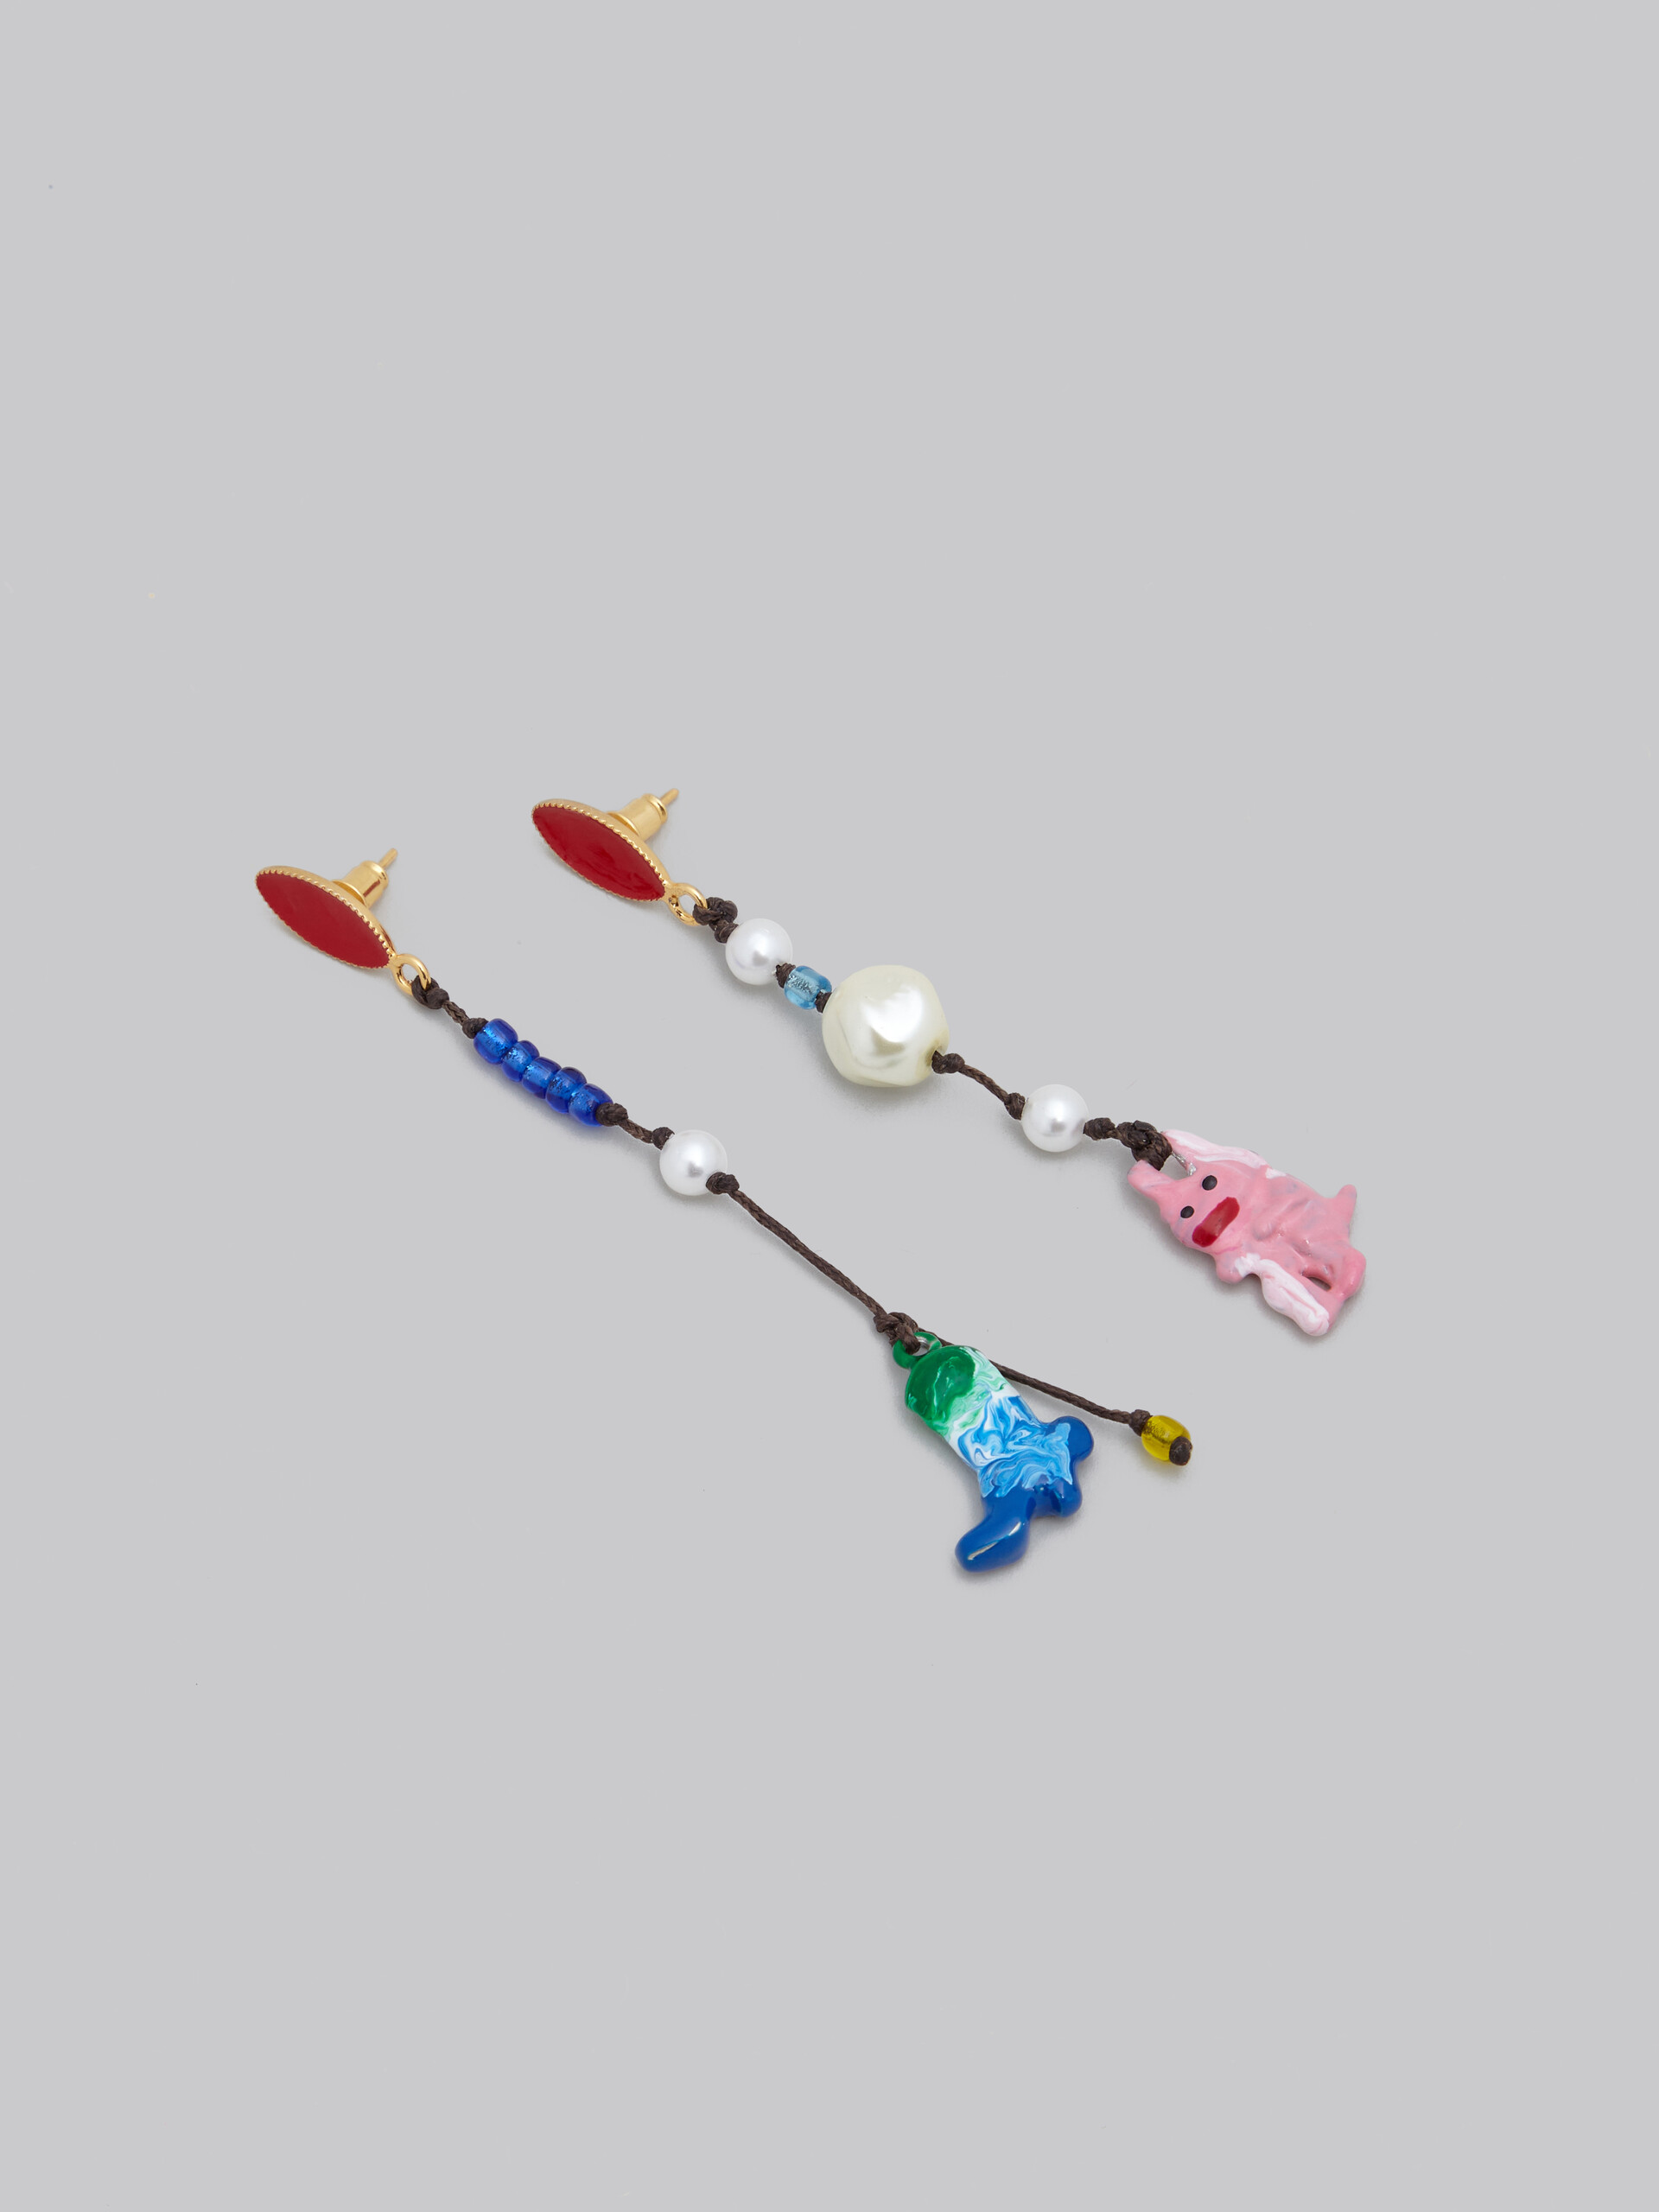 Marni x No Vacancy Inn - Earrings with pink red and blue pendants - Earrings - Image 4